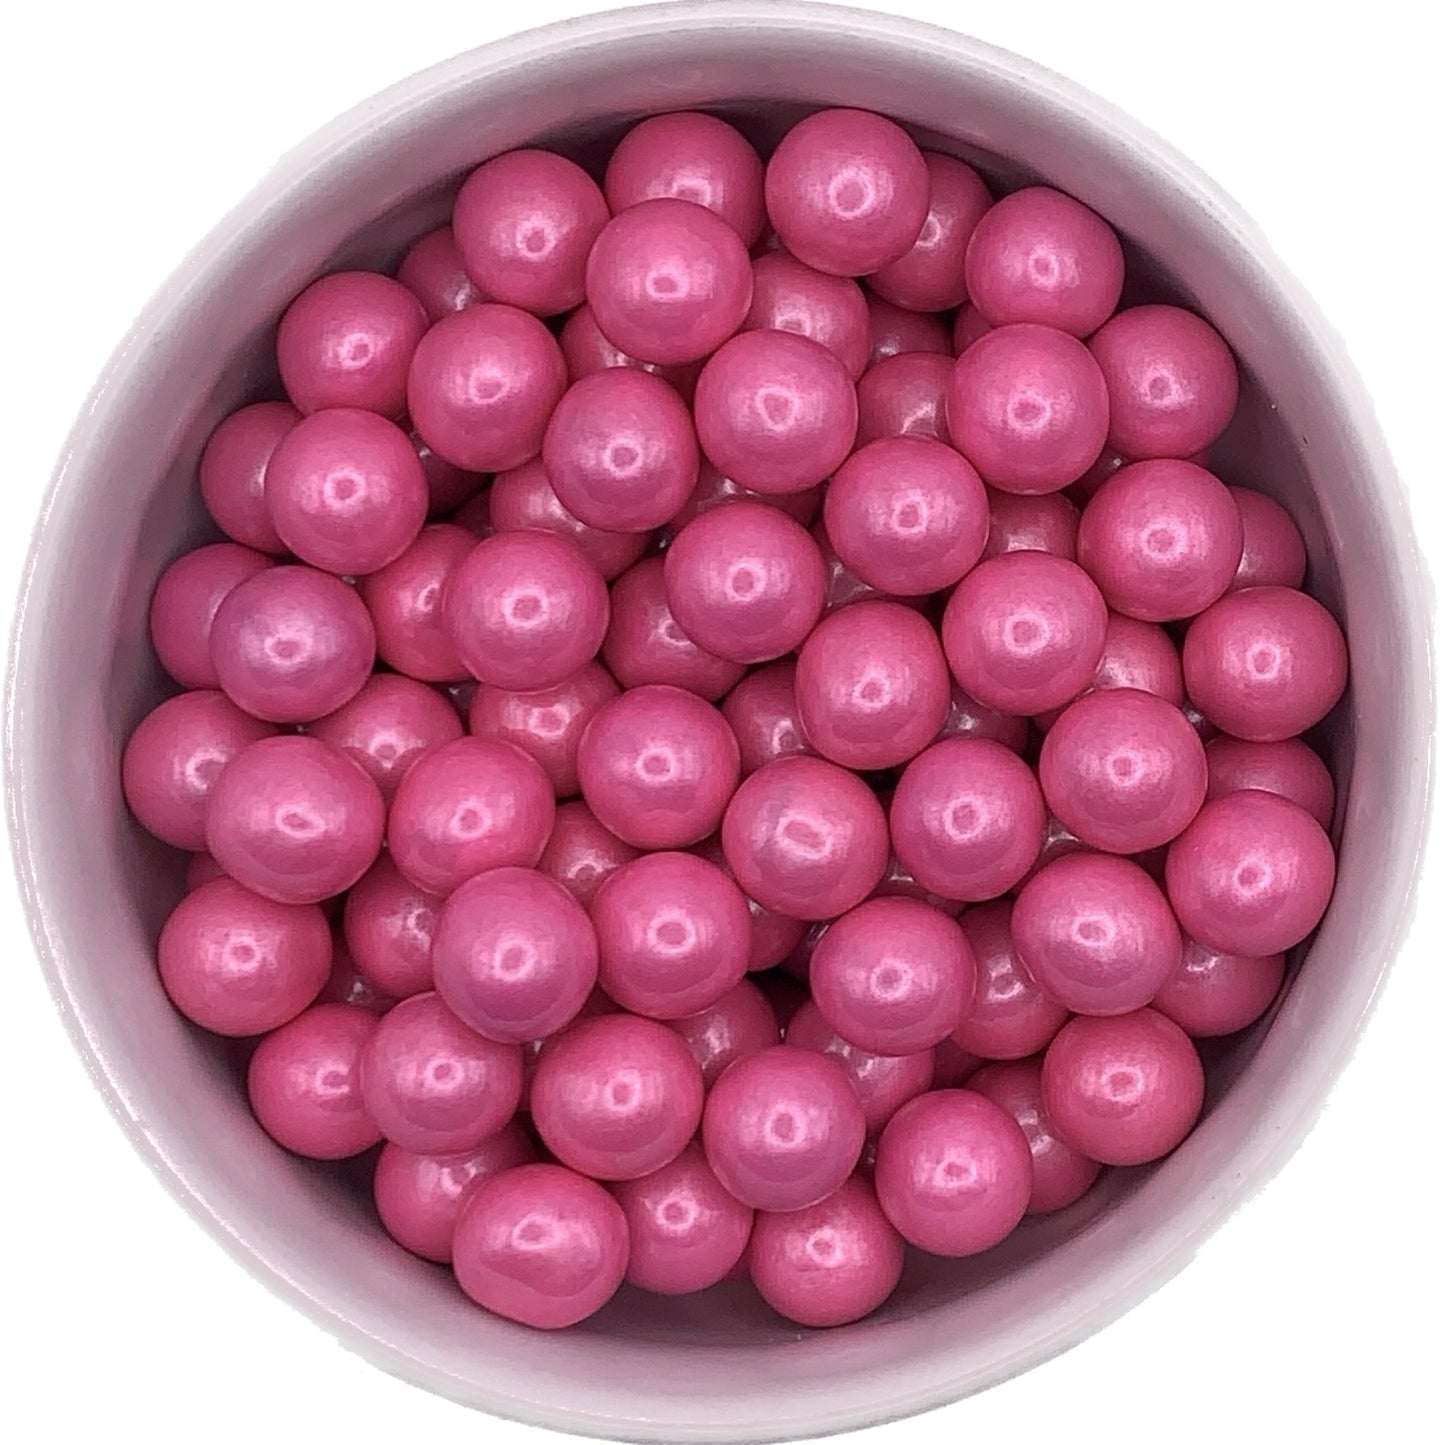 Bright Pink sixlets candies